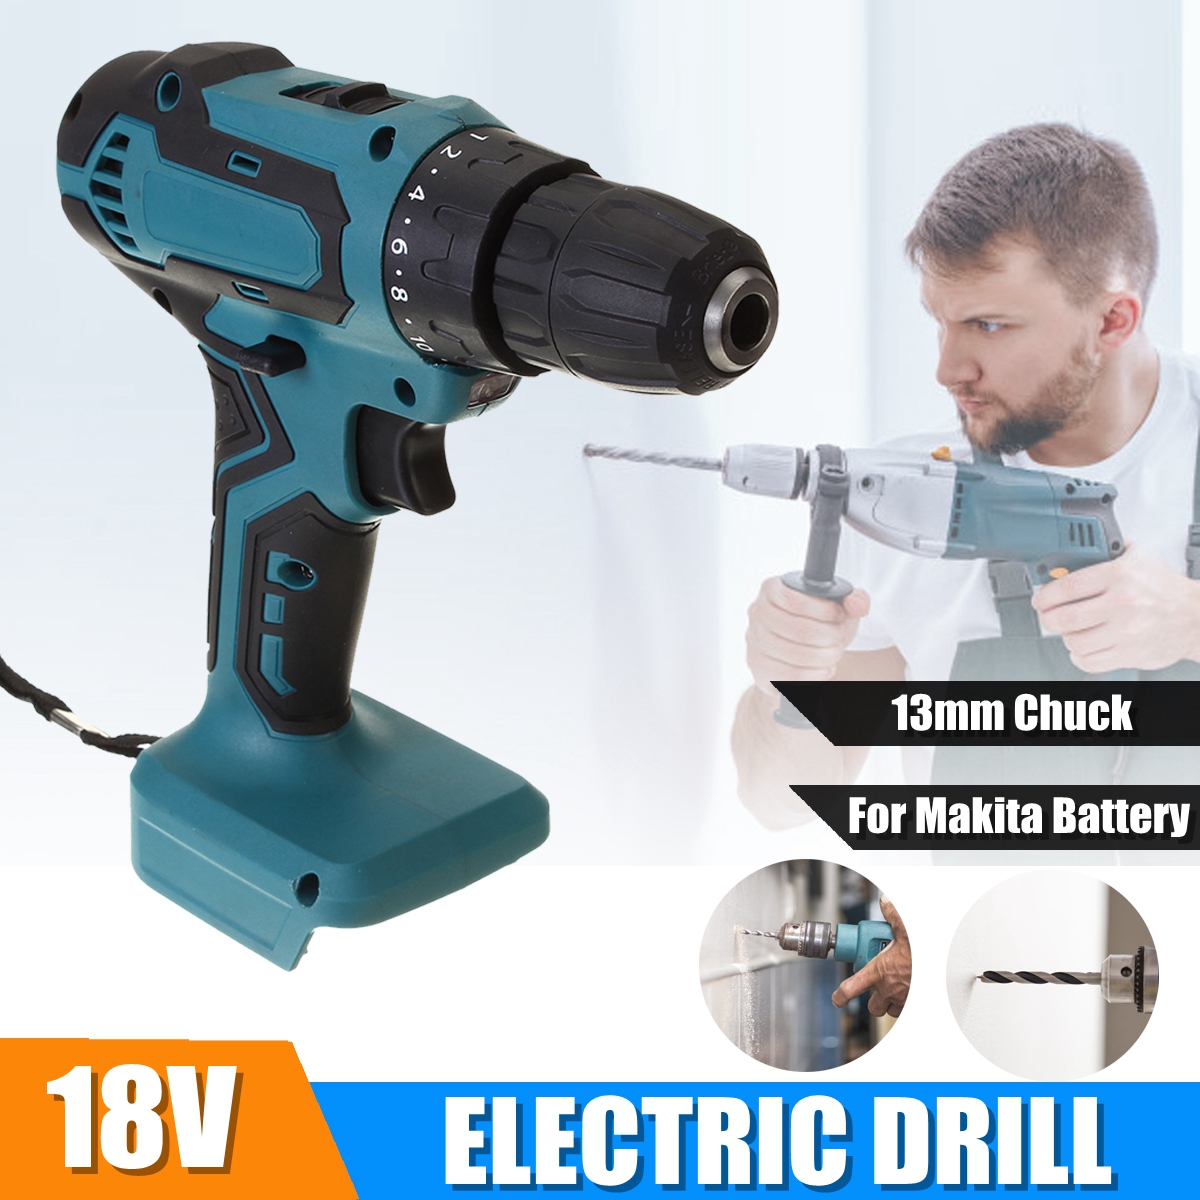 18V-13mm-Cordless-Electric-Drill-2-Speed-Screwdriver-For-Makita-Battery-1717184-1